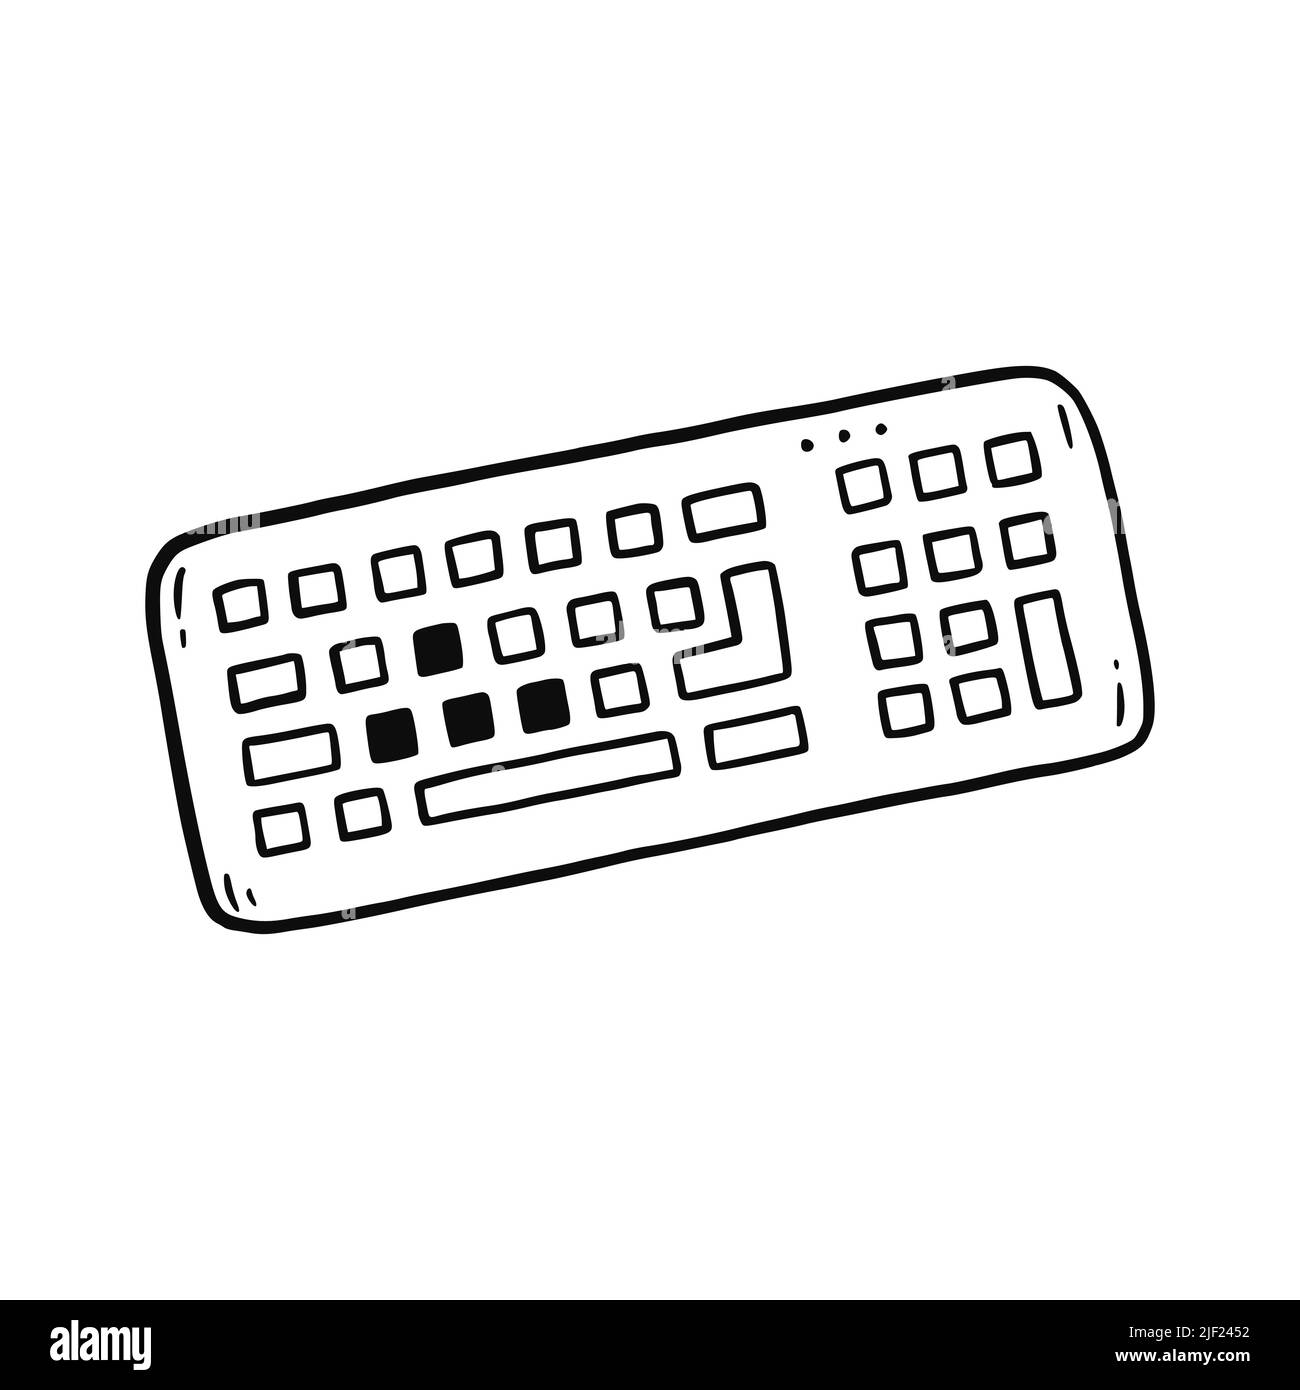 How to Draw an Ultra Clean Apple Keyboard with Photoshop  Photoshop  Tutorials